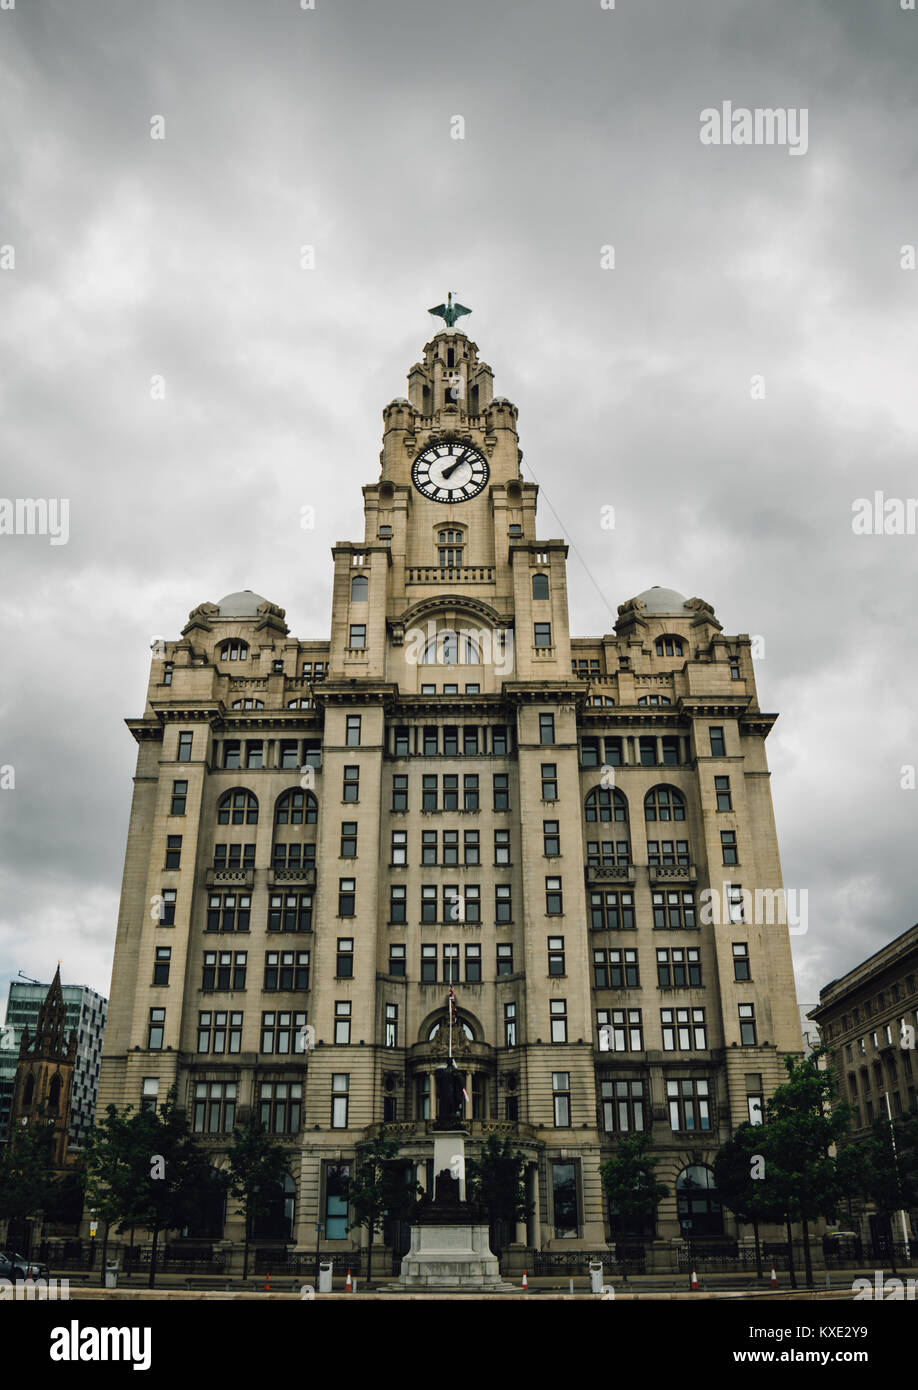 Liver Building in Liverpool, England UK. The Royal Liver Building is famous Liverpool landmark located at Pier Head. One of Liverpool's Three Graces. Stock Photo